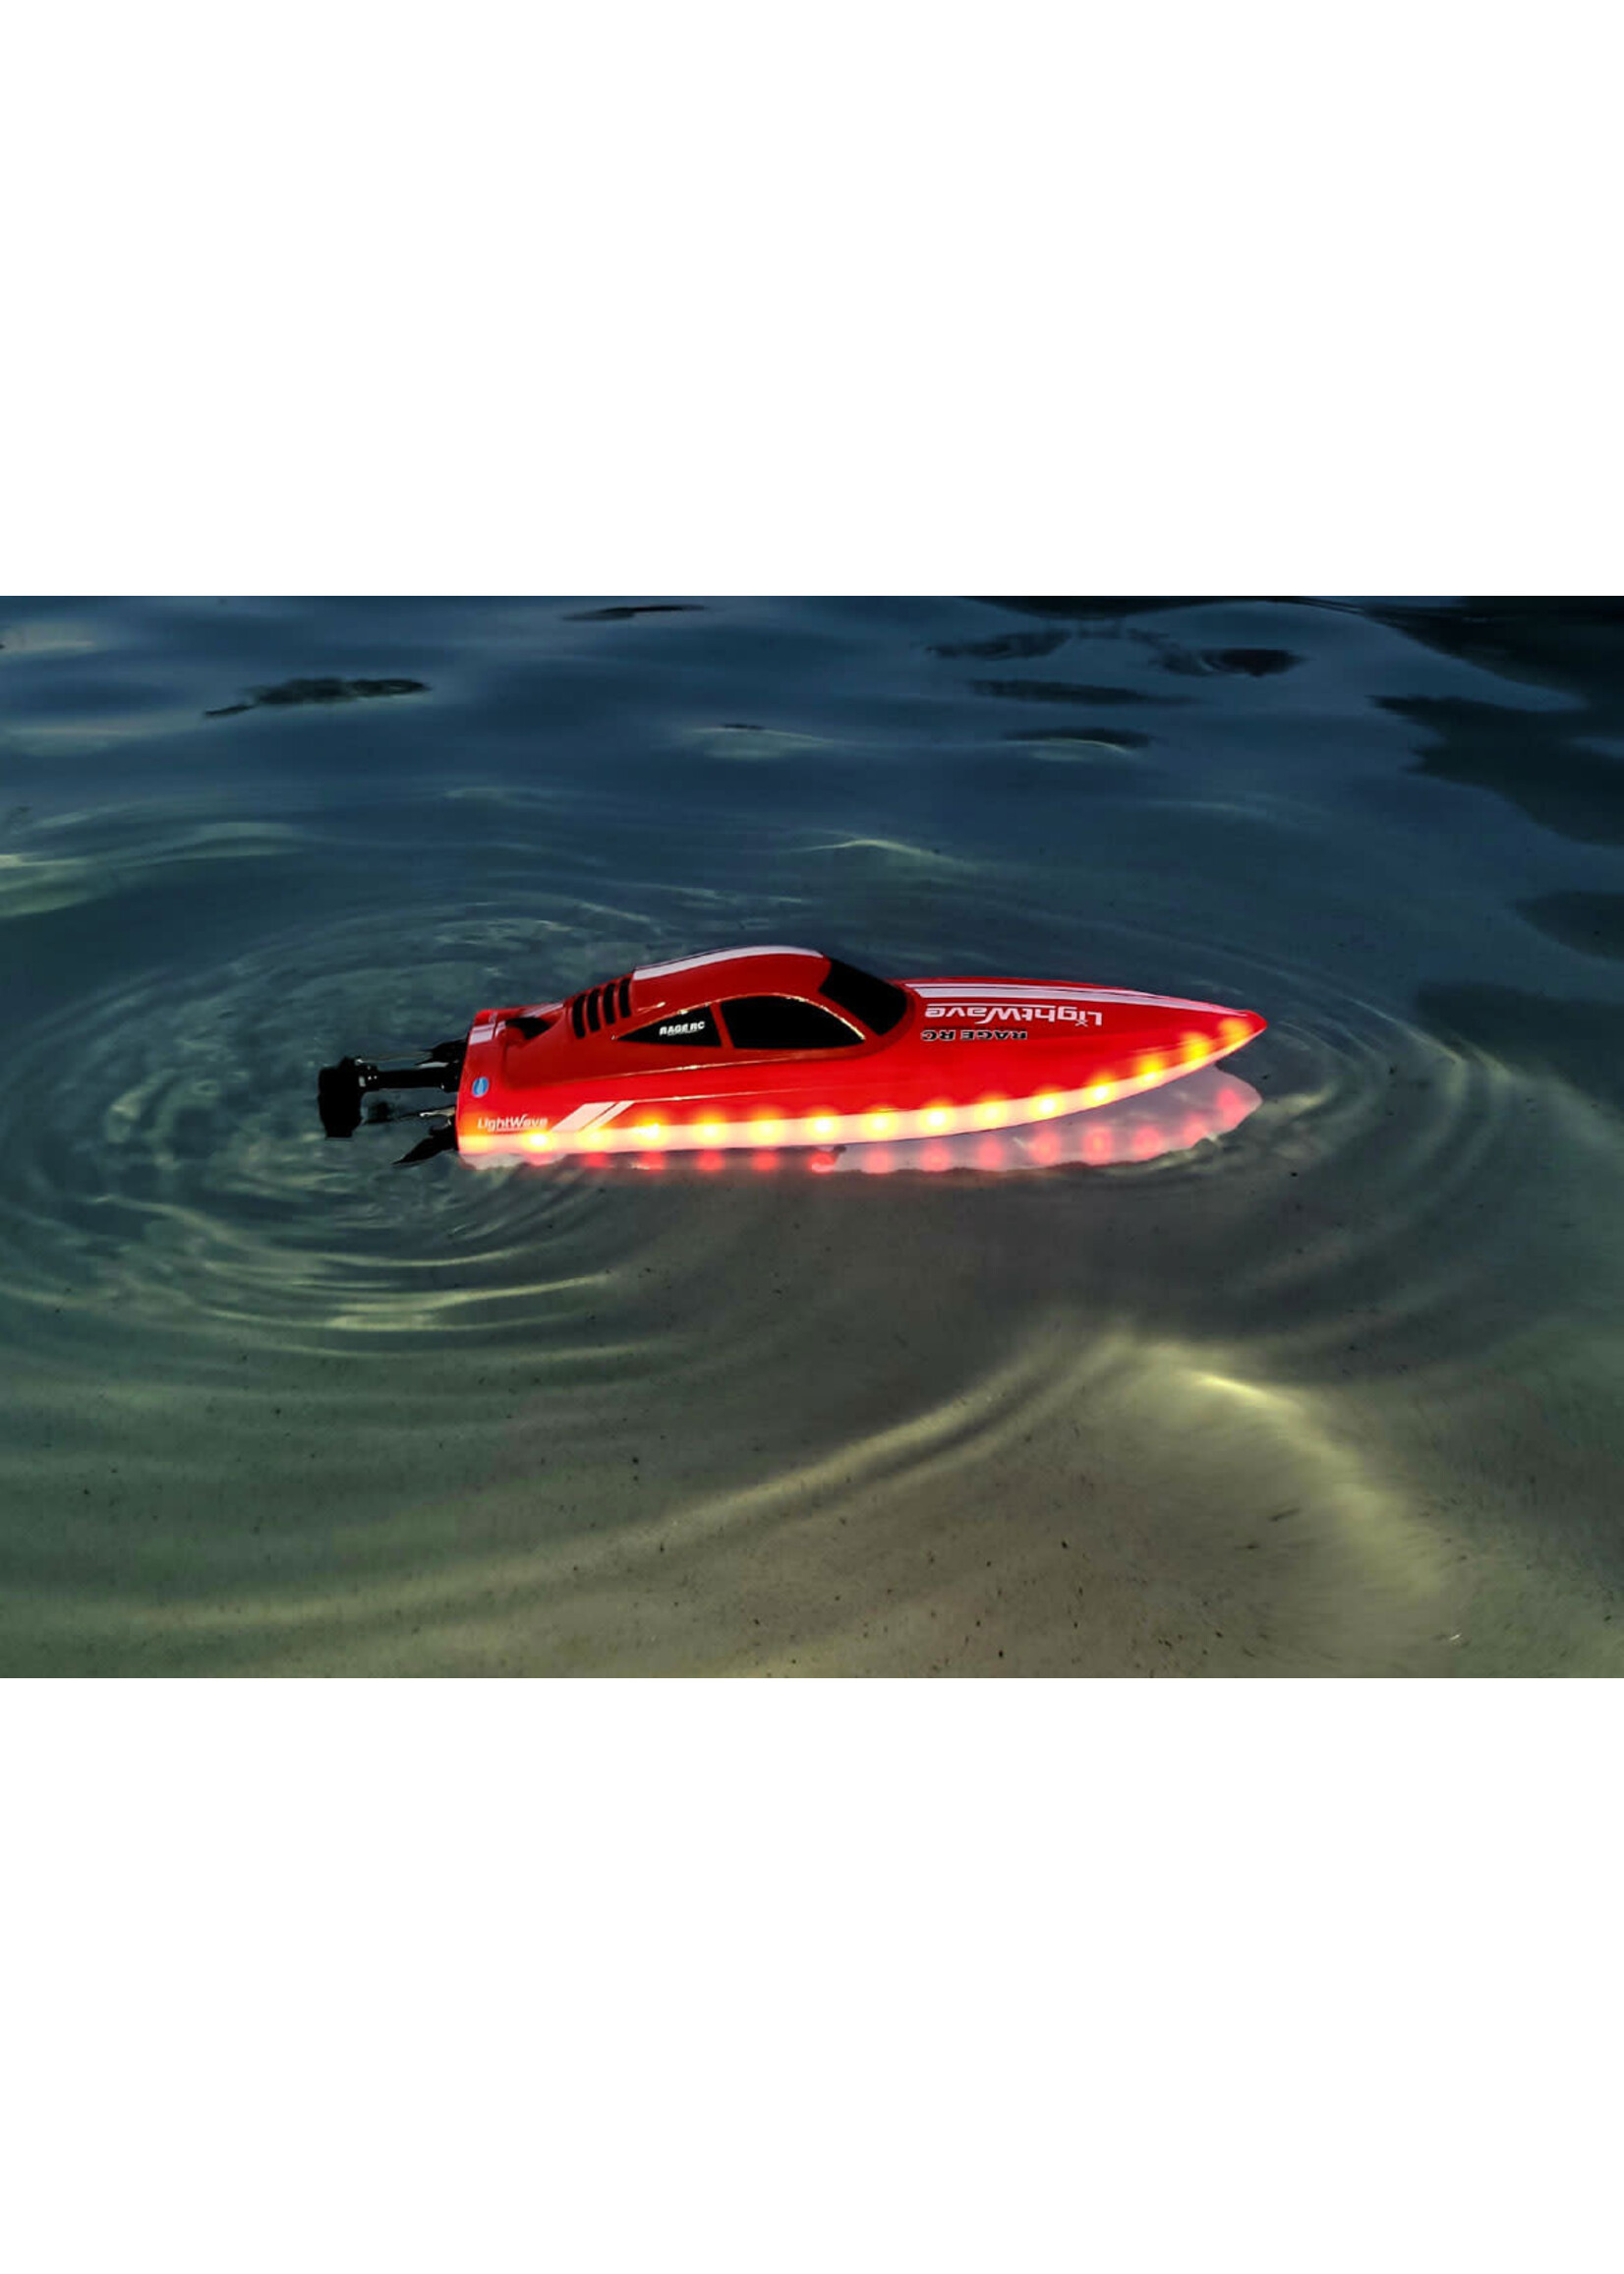 Rage RC RGRB1133 Rage RC LightWave Electric Micro RTR Boat; Red